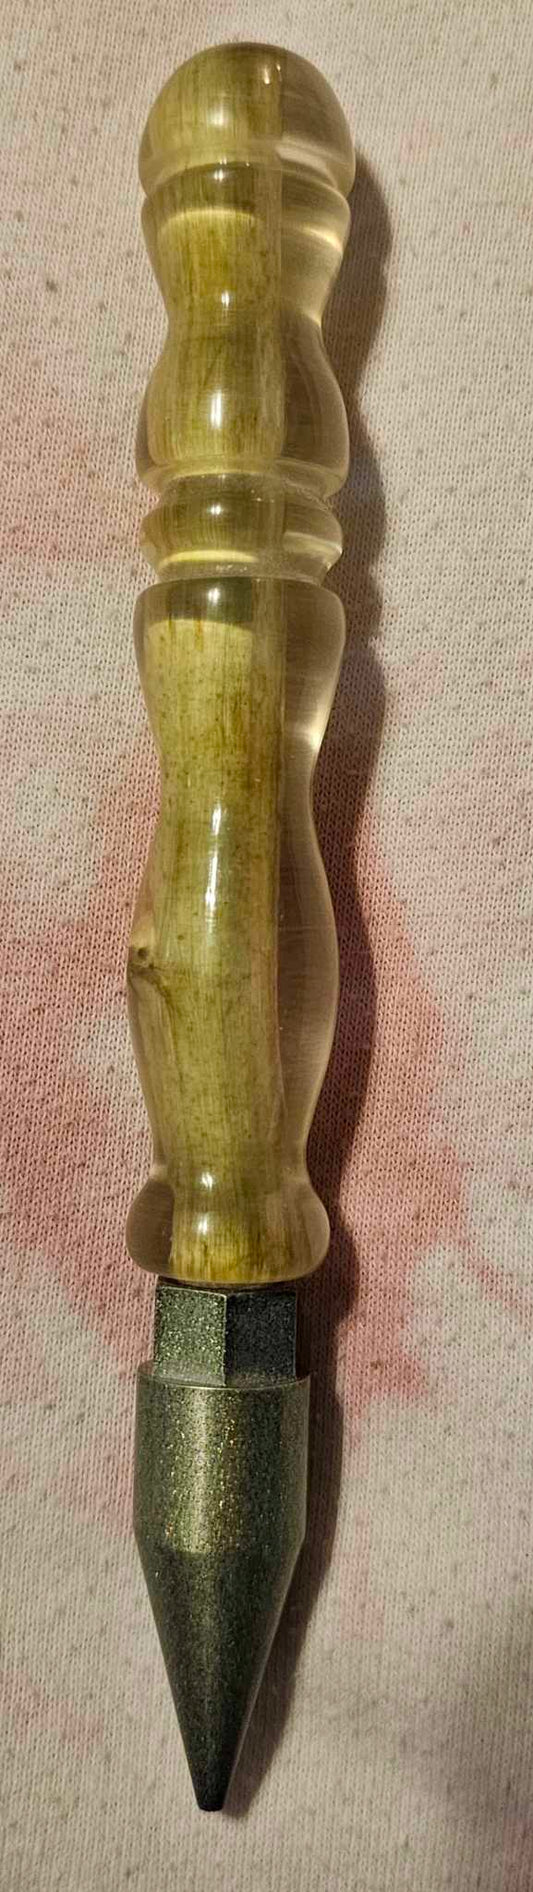 Hemp Stem (Pre-Turned) 6 inch with tip. Pictured Tip is for reference only